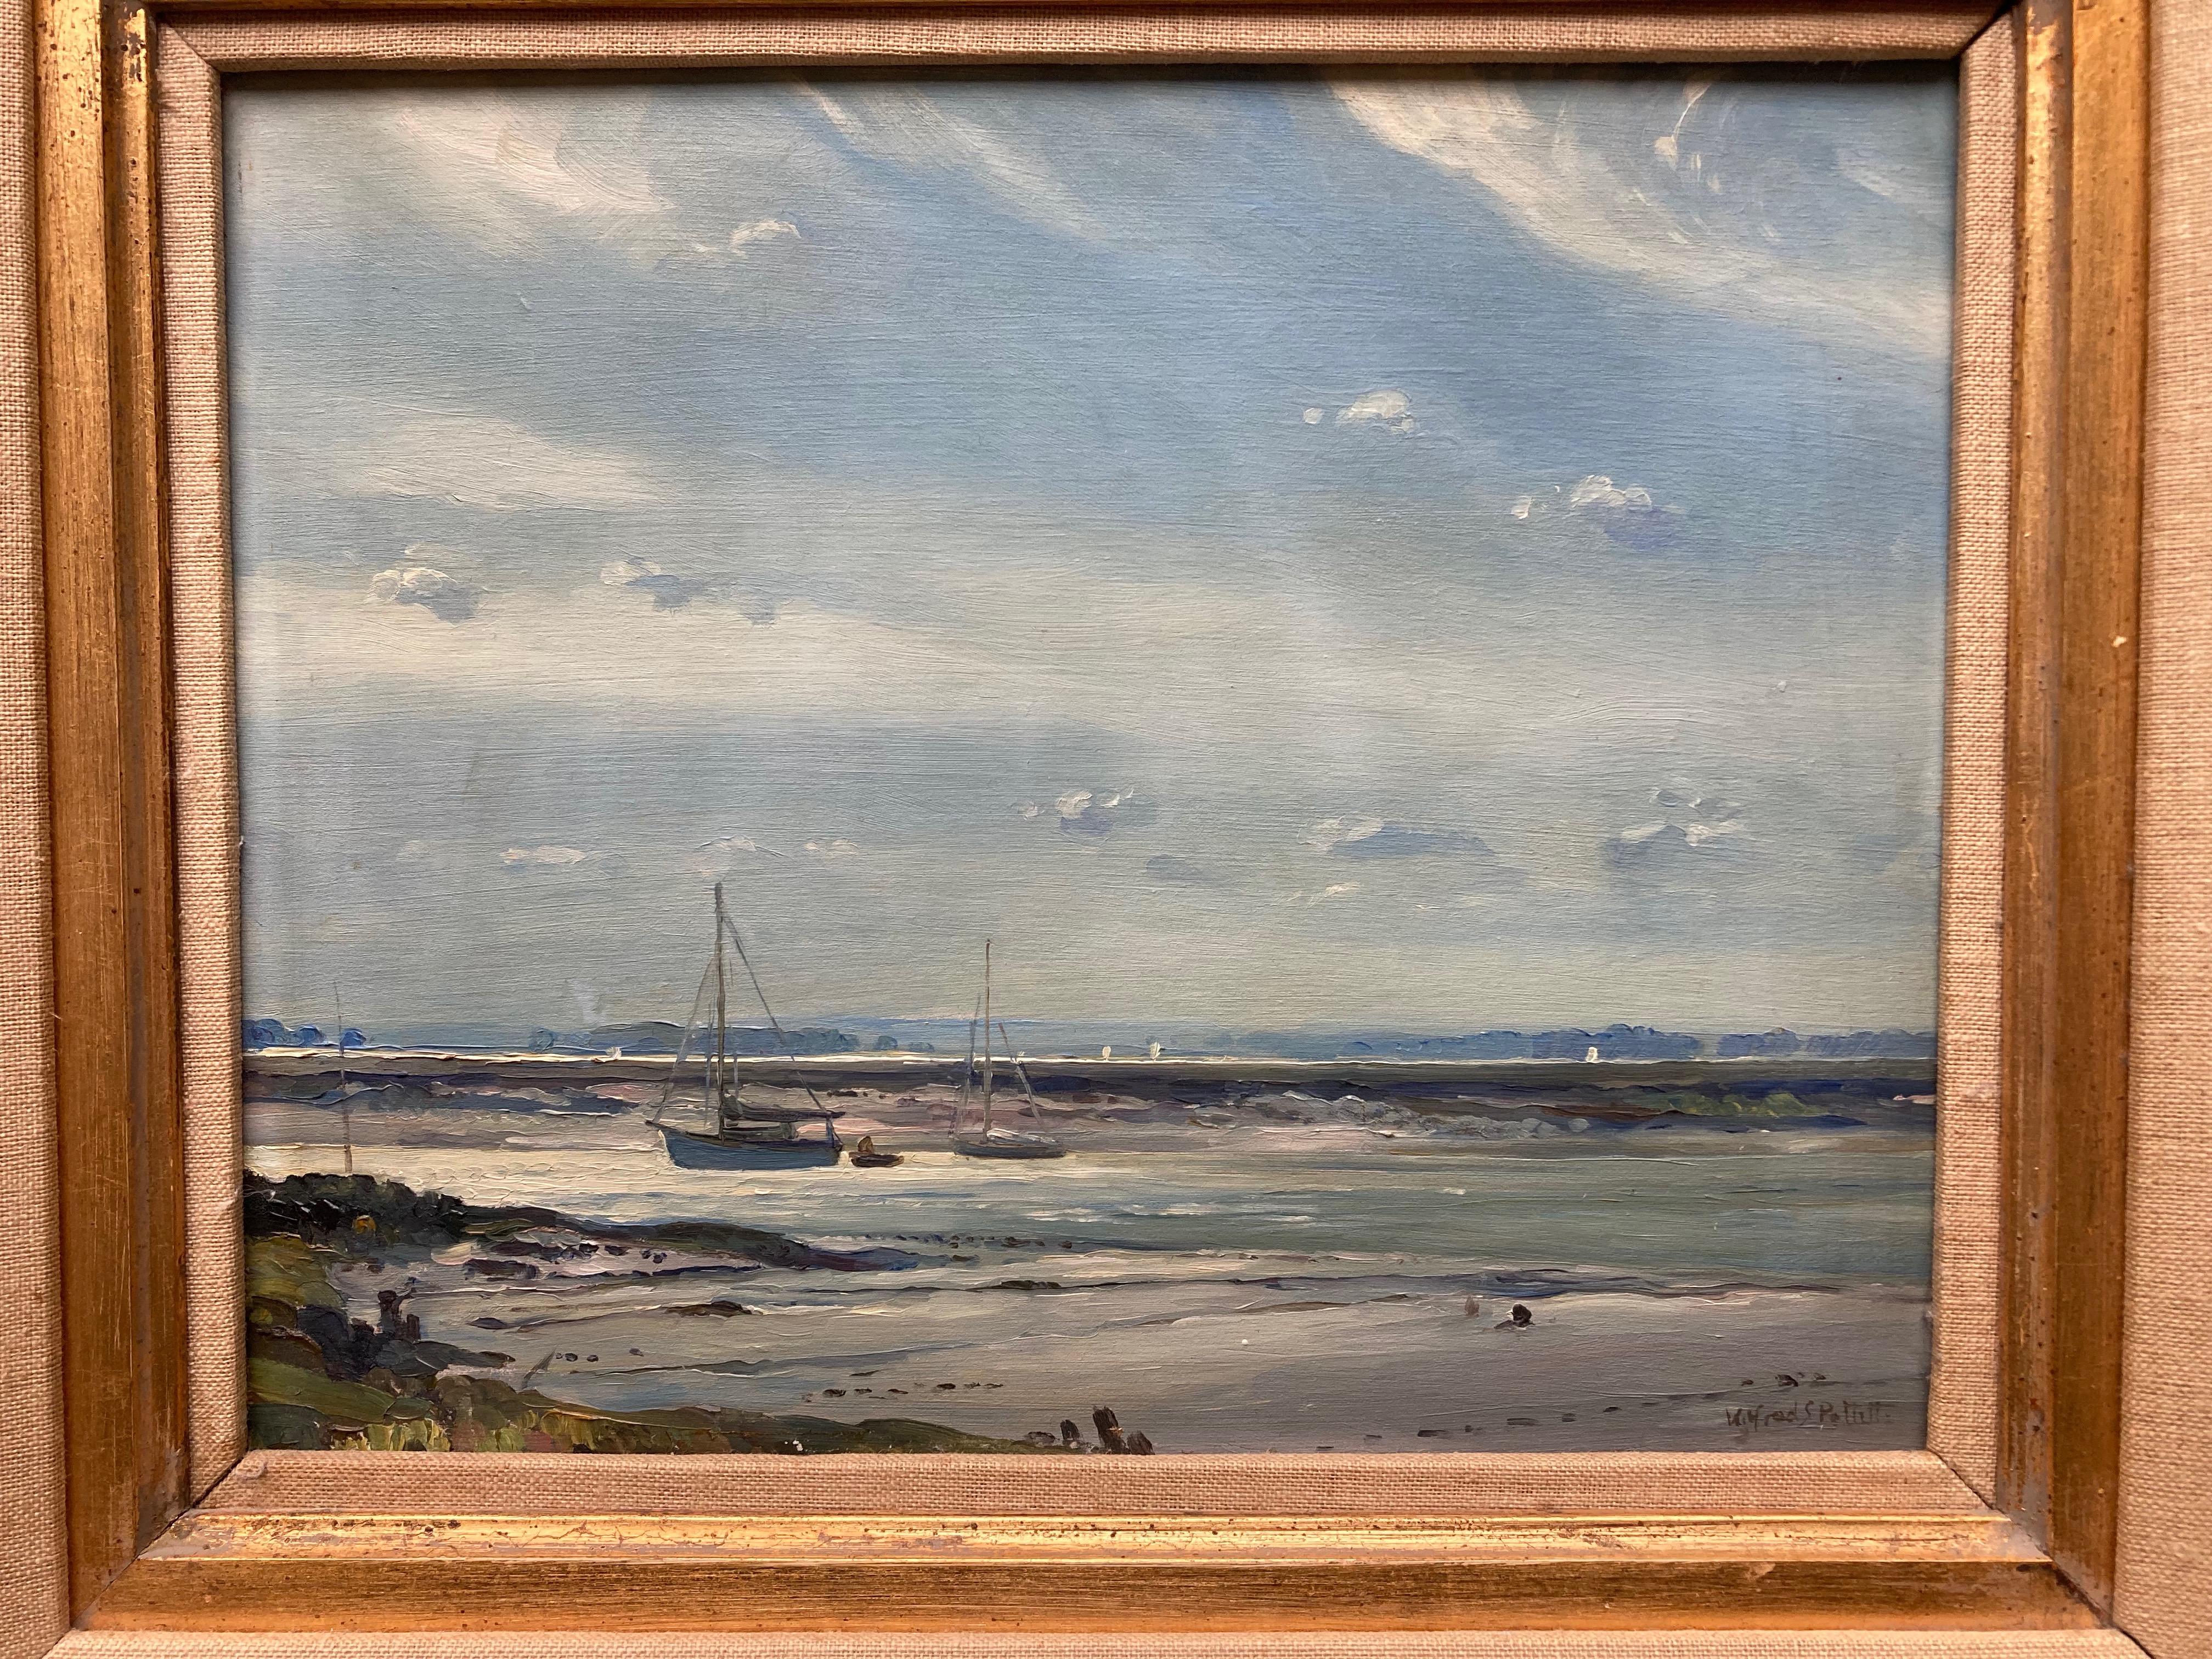 Wilfred Stanley Pettitt (1904-1978)
The Blackwater from Bradwell Quay
Signed, inscribed with title verso
Oil on board
9 x 10¾ inches unframed
14¾ x 16¾ inches with the frame

Wilfred Stanley Pettitt was born in Great Yarmouth in 1904, the fourth